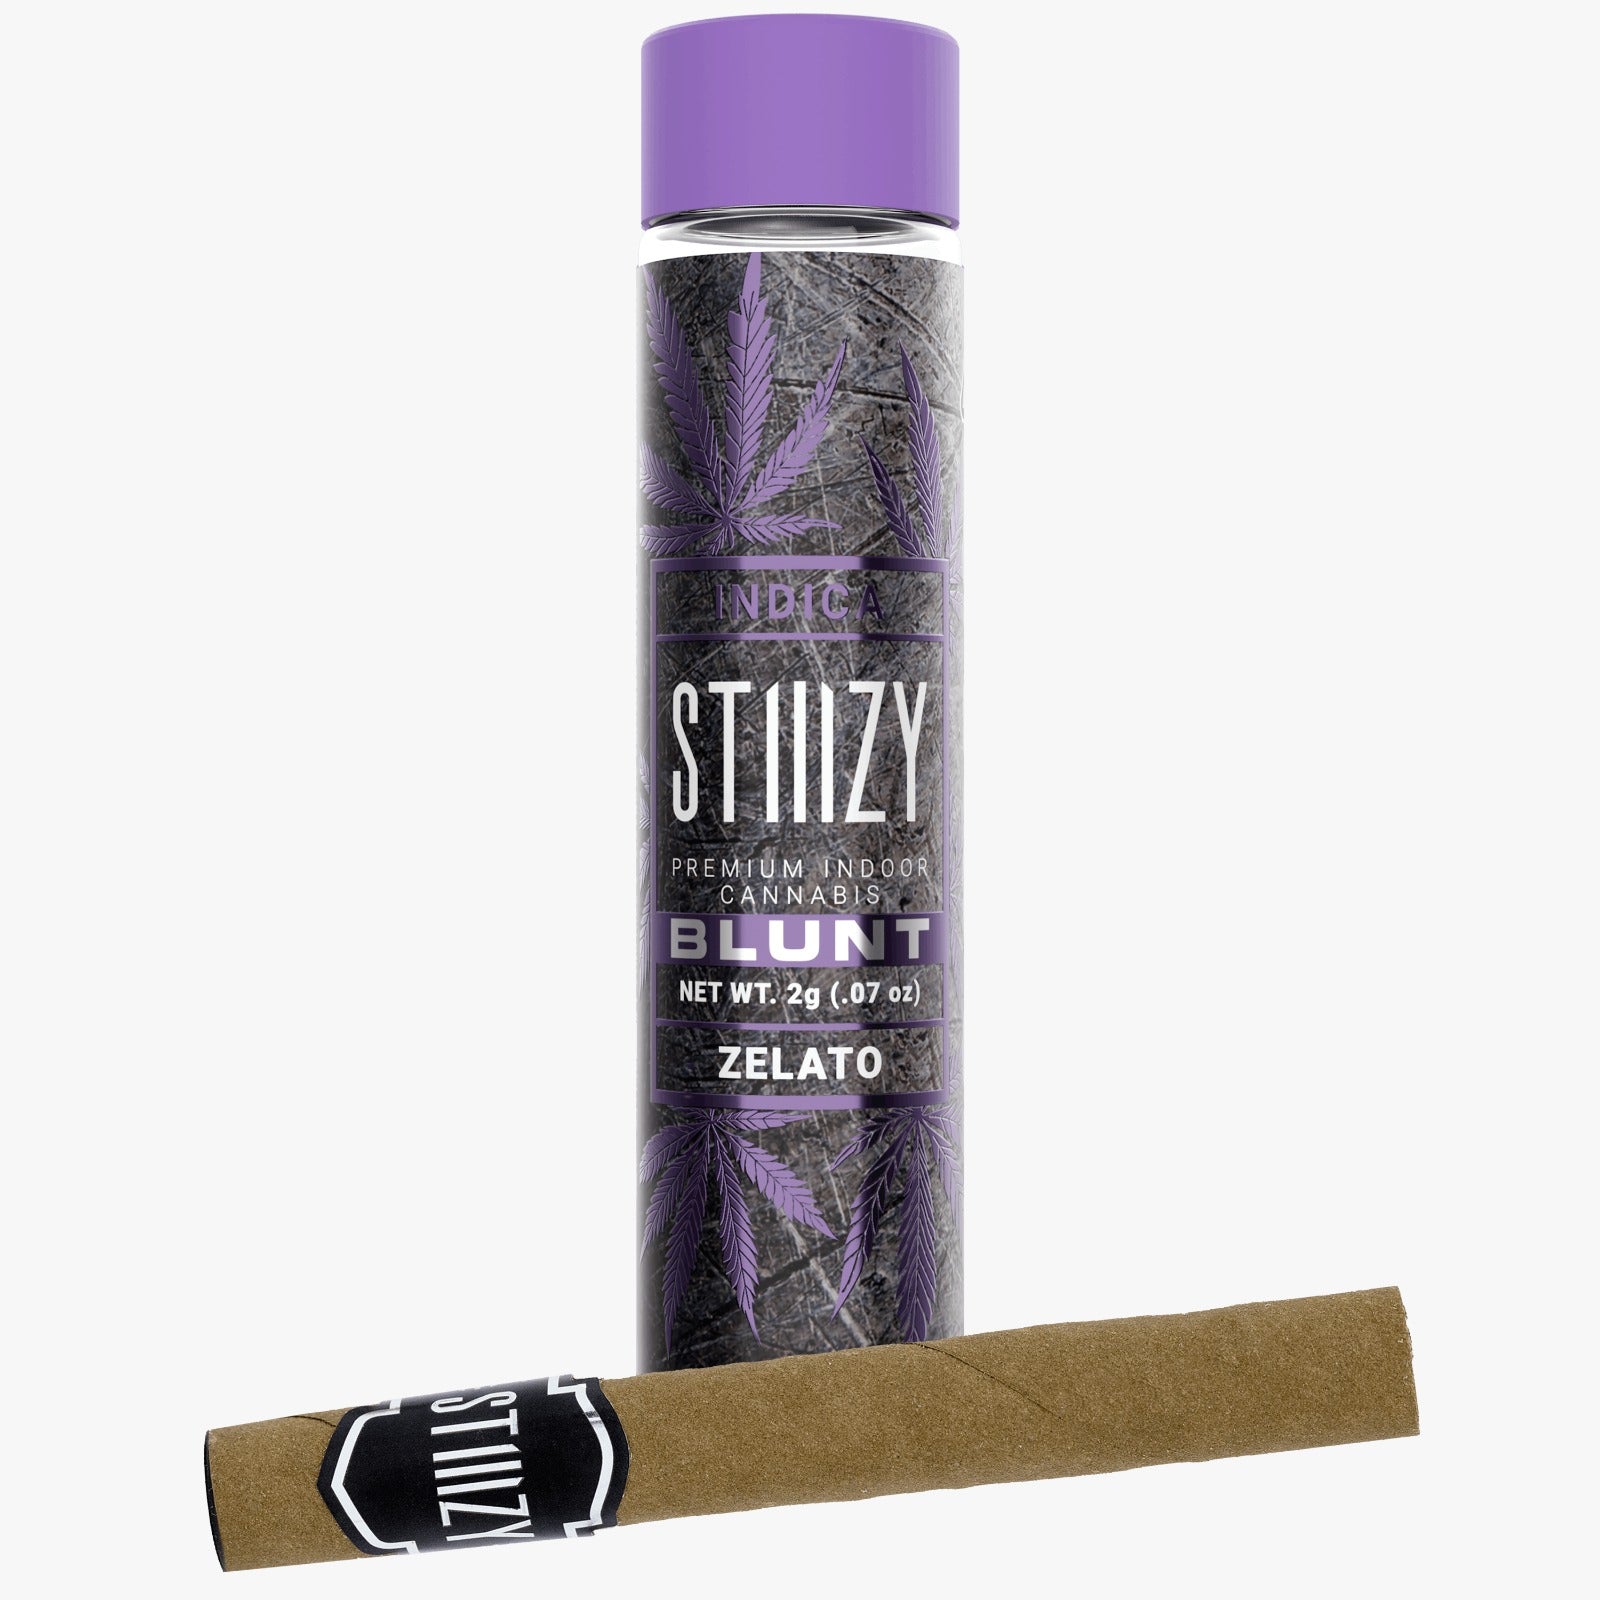 A blunt rolled with indica cannabis flower from the Zelato strain lies in front of its purple-capped STIIIZY jar.